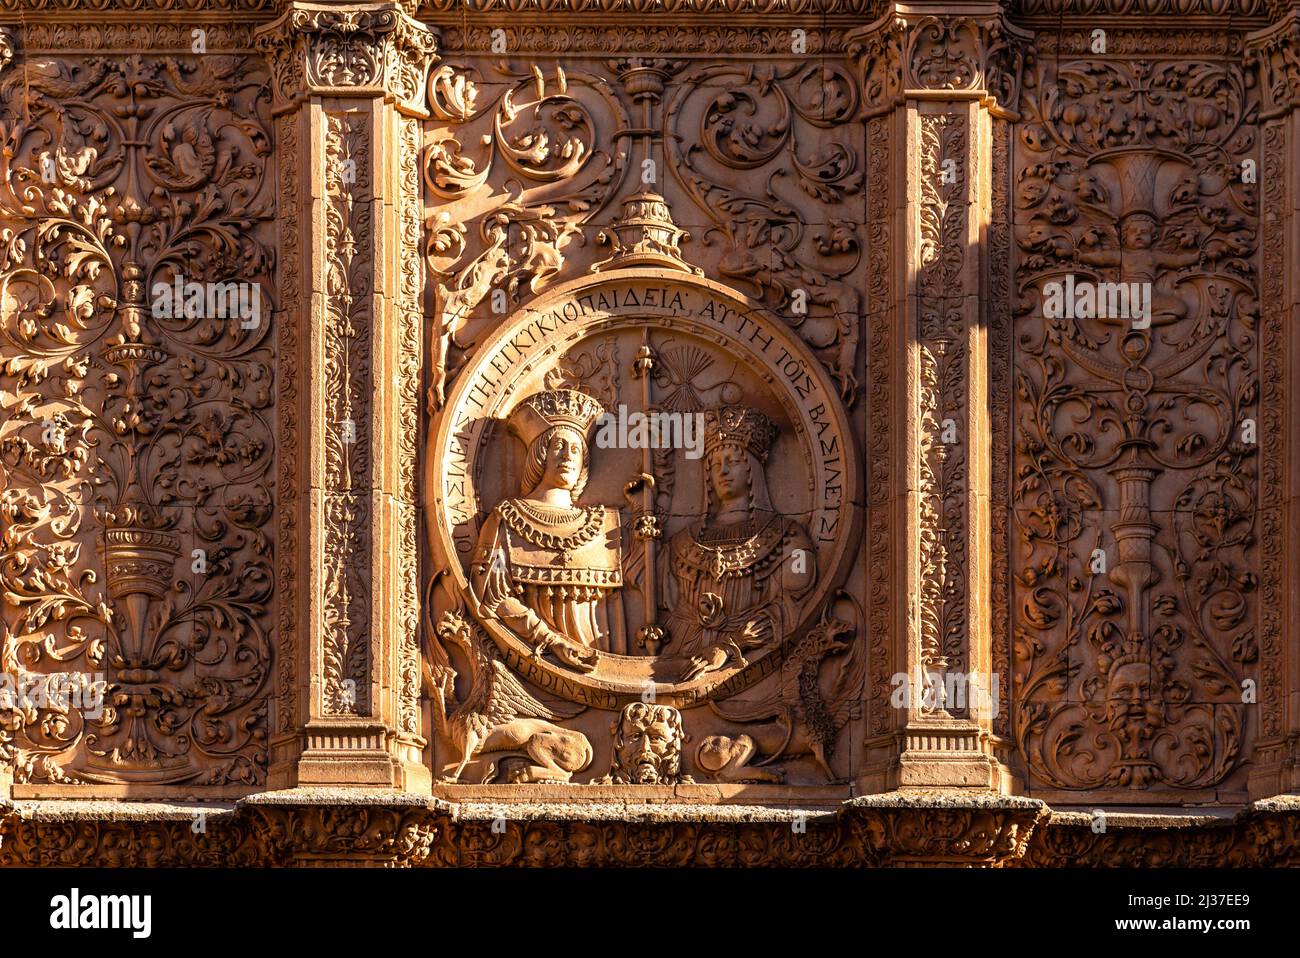 Beautiful view of detail of decoration of famous facade of University of Salamanca, the oldest university in Spain, Castilla y Leon region. Stock Photo